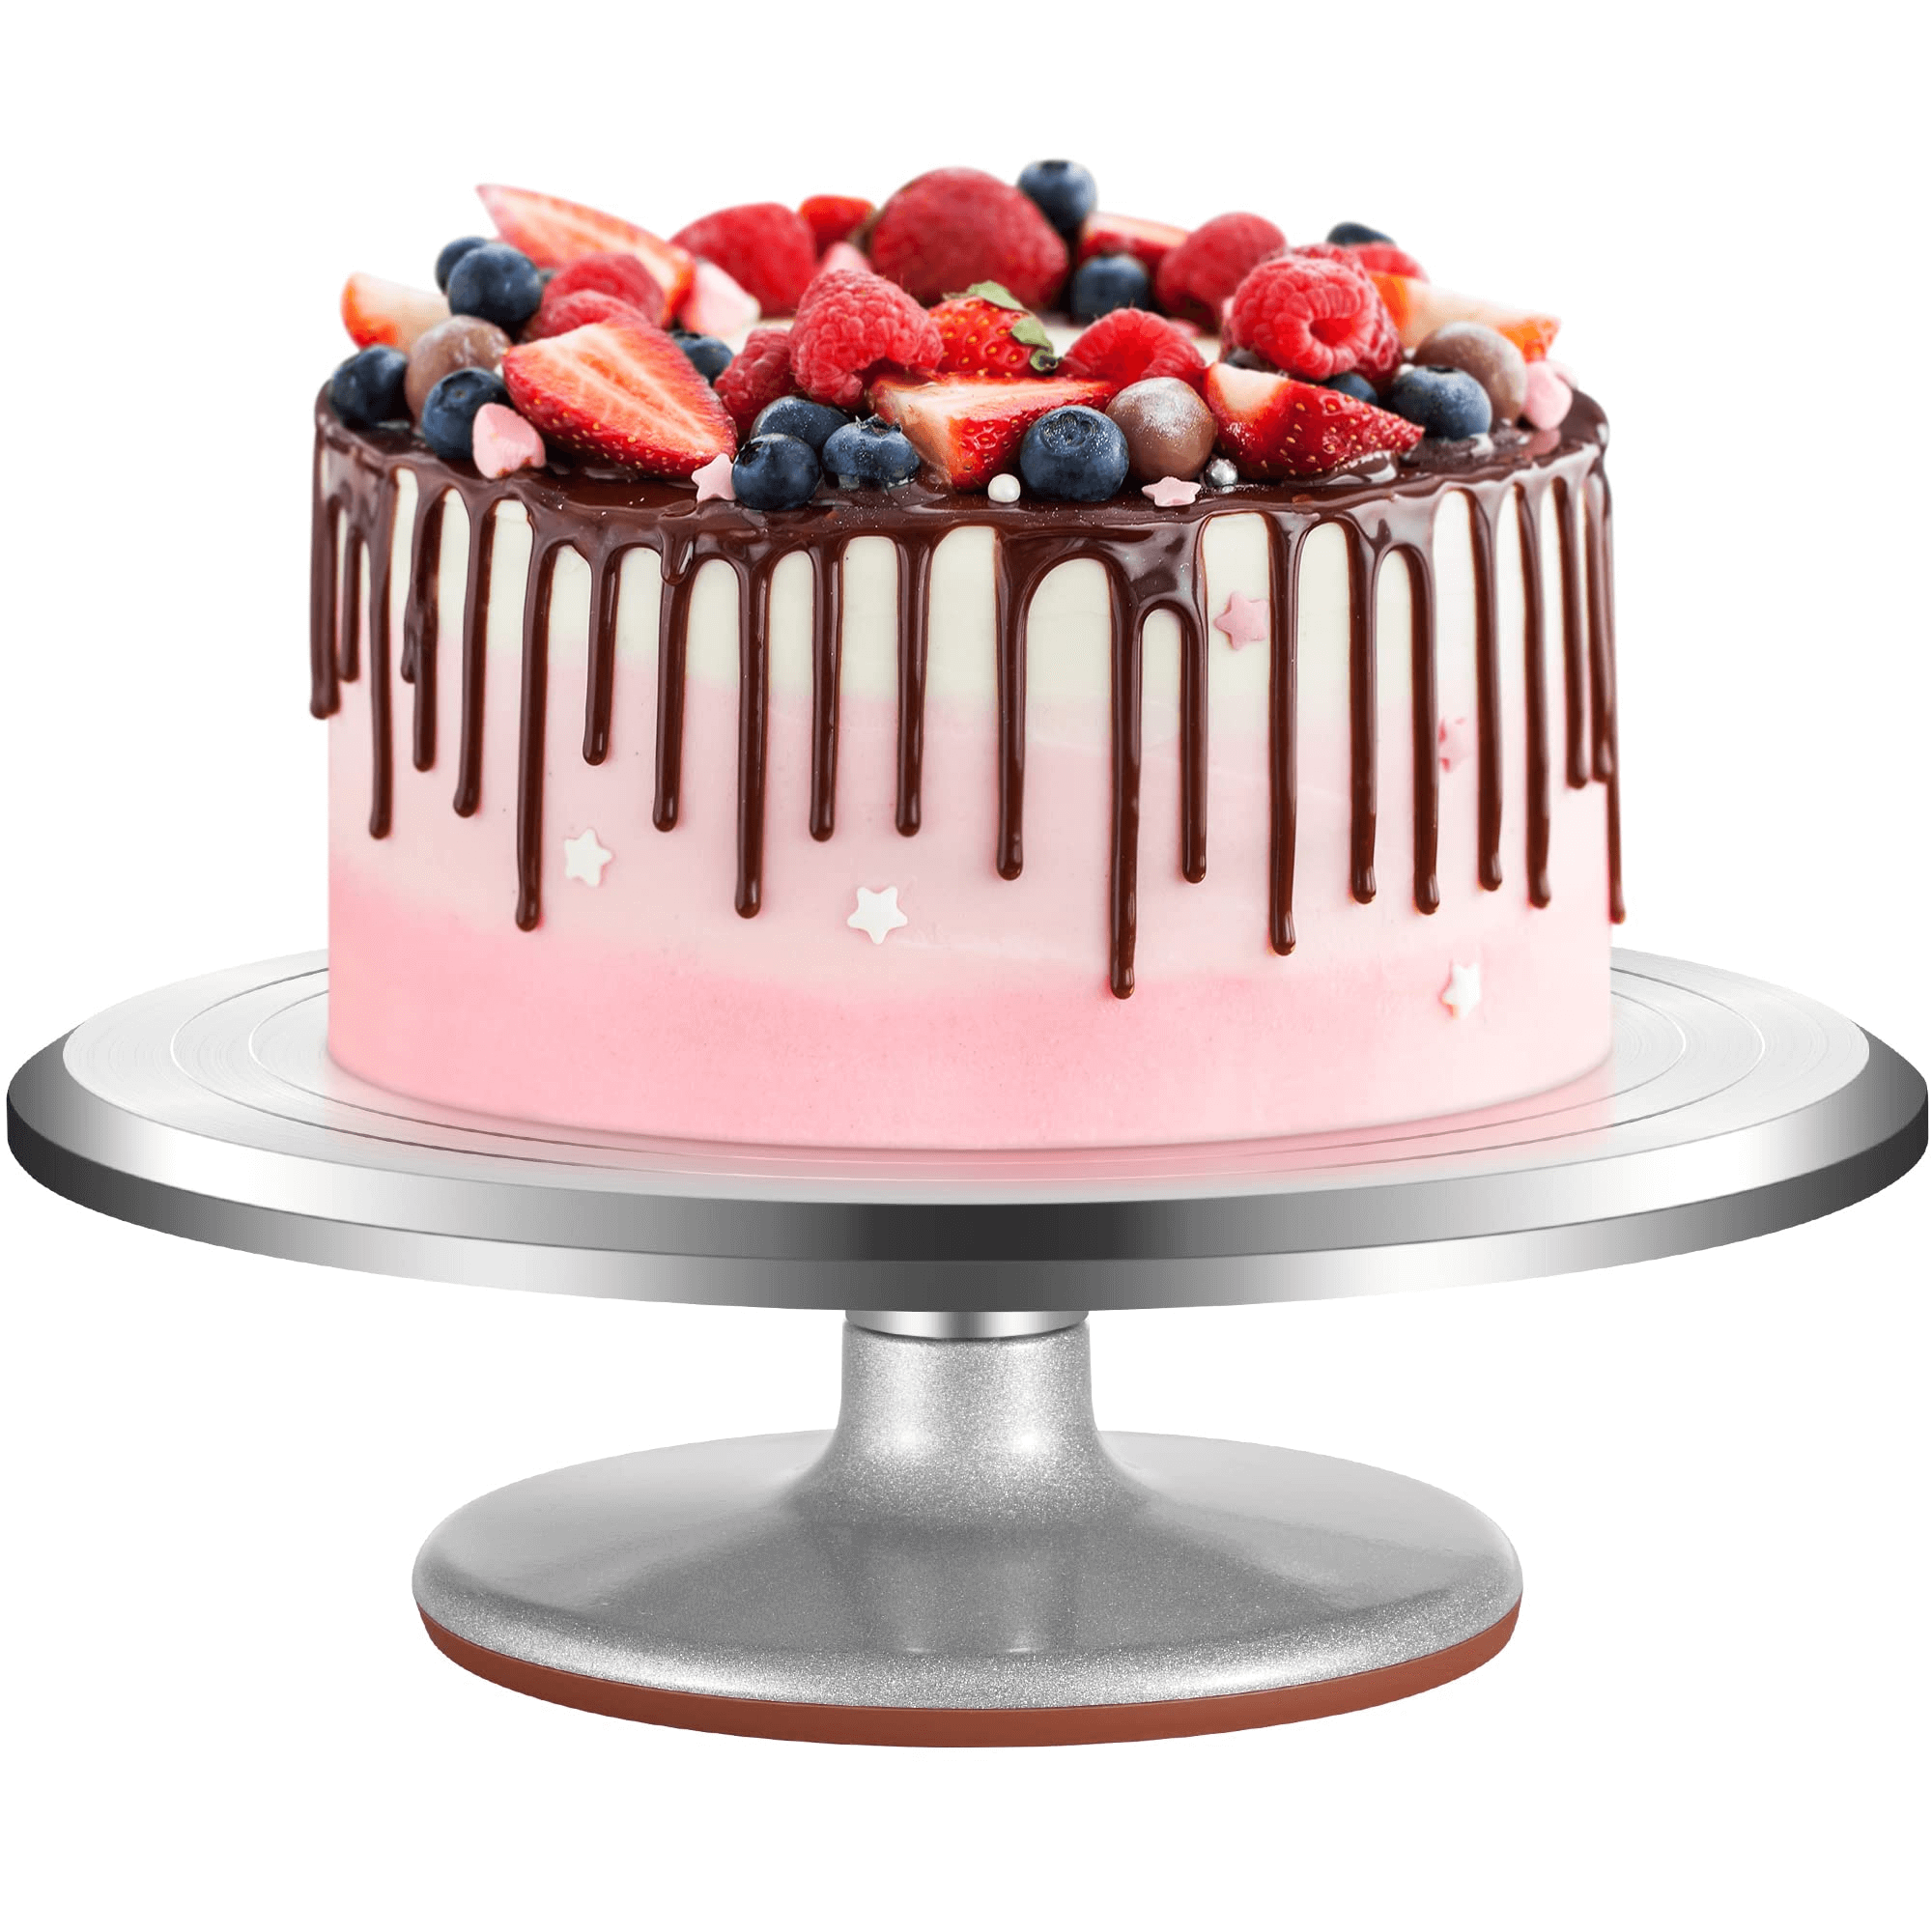 12 inch rotating cake decorating stand - Tsingbuy has engaged in  manufacturing professional customization bakeware for more than 12 years.